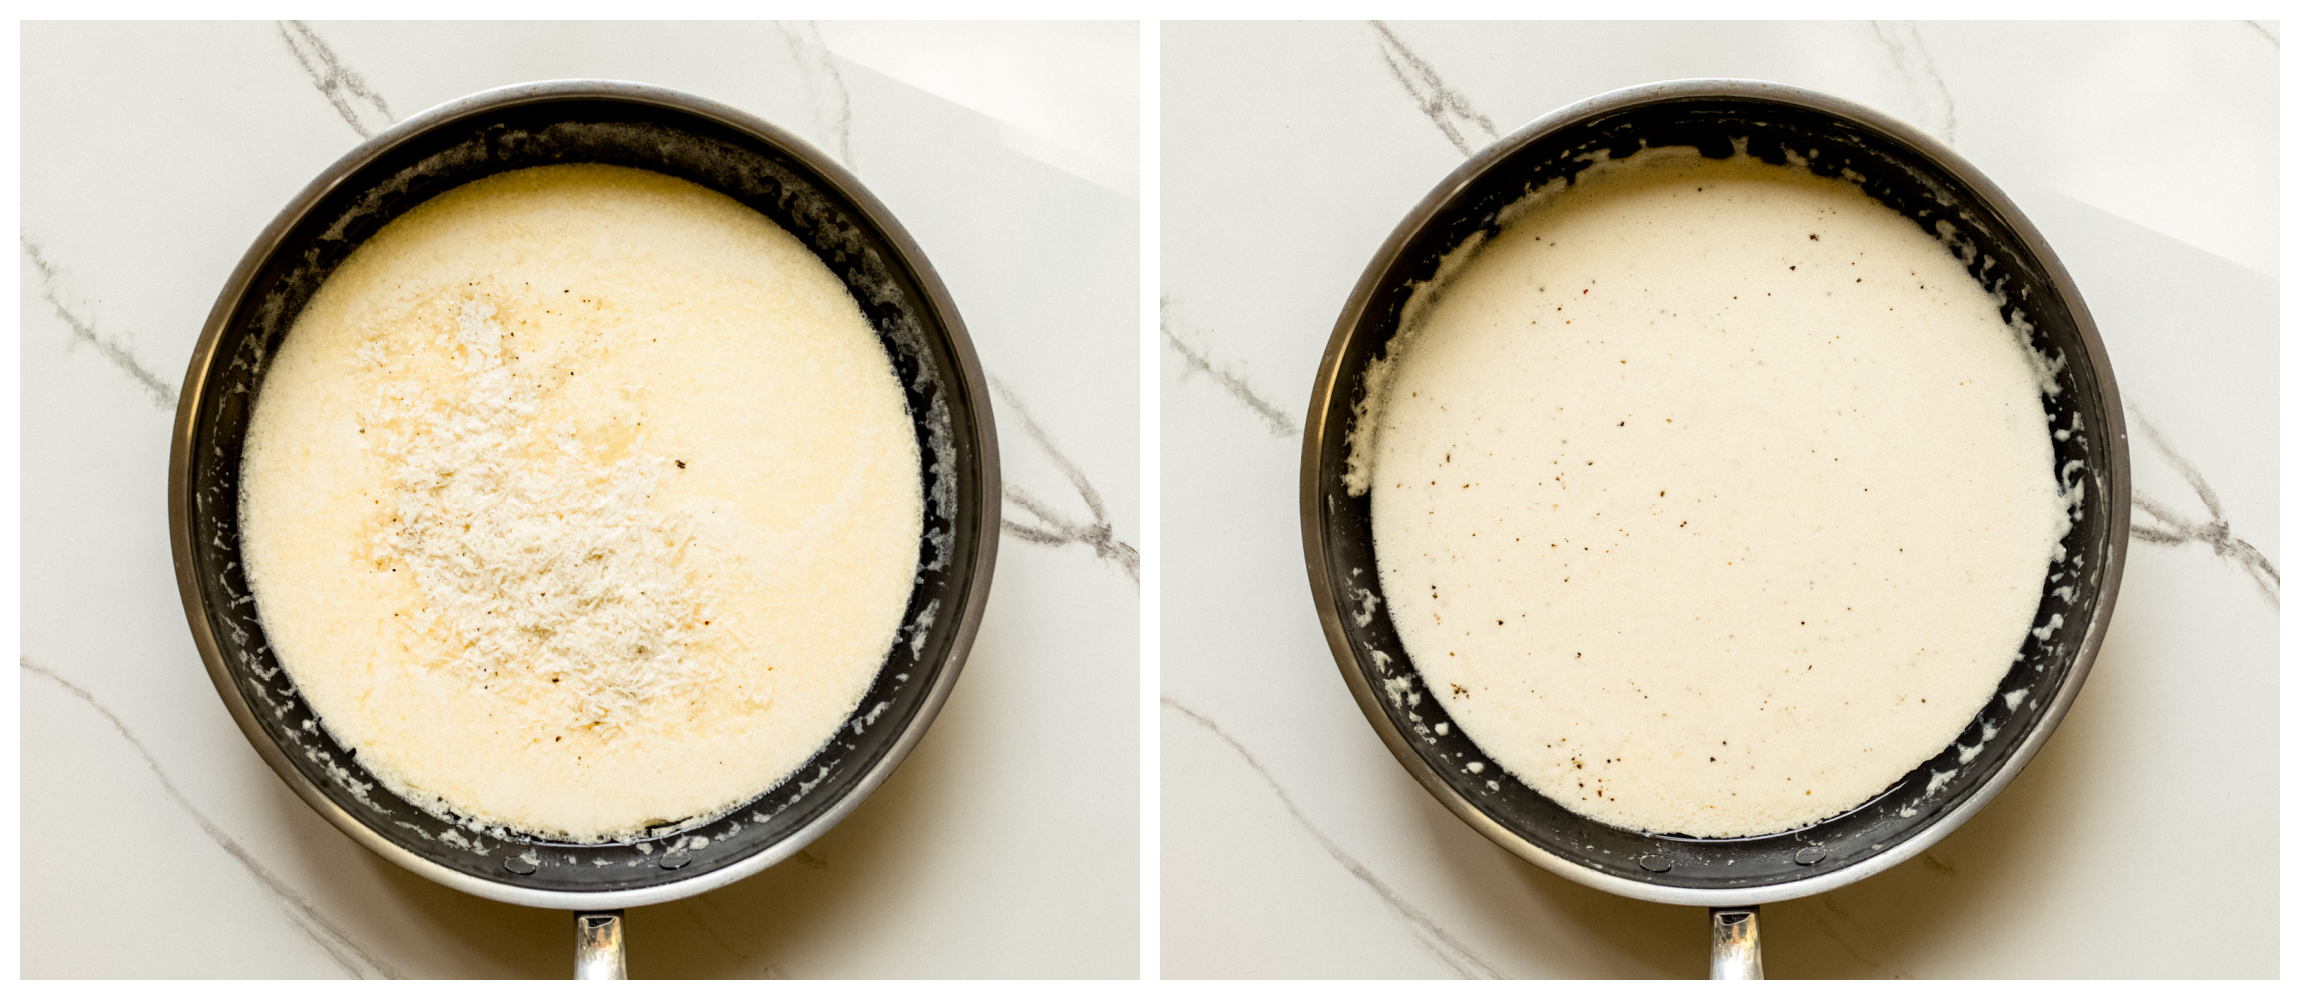 two skillet photos, showing cream and shredded parmesan cheese in one, and melted cheese and cream in second.